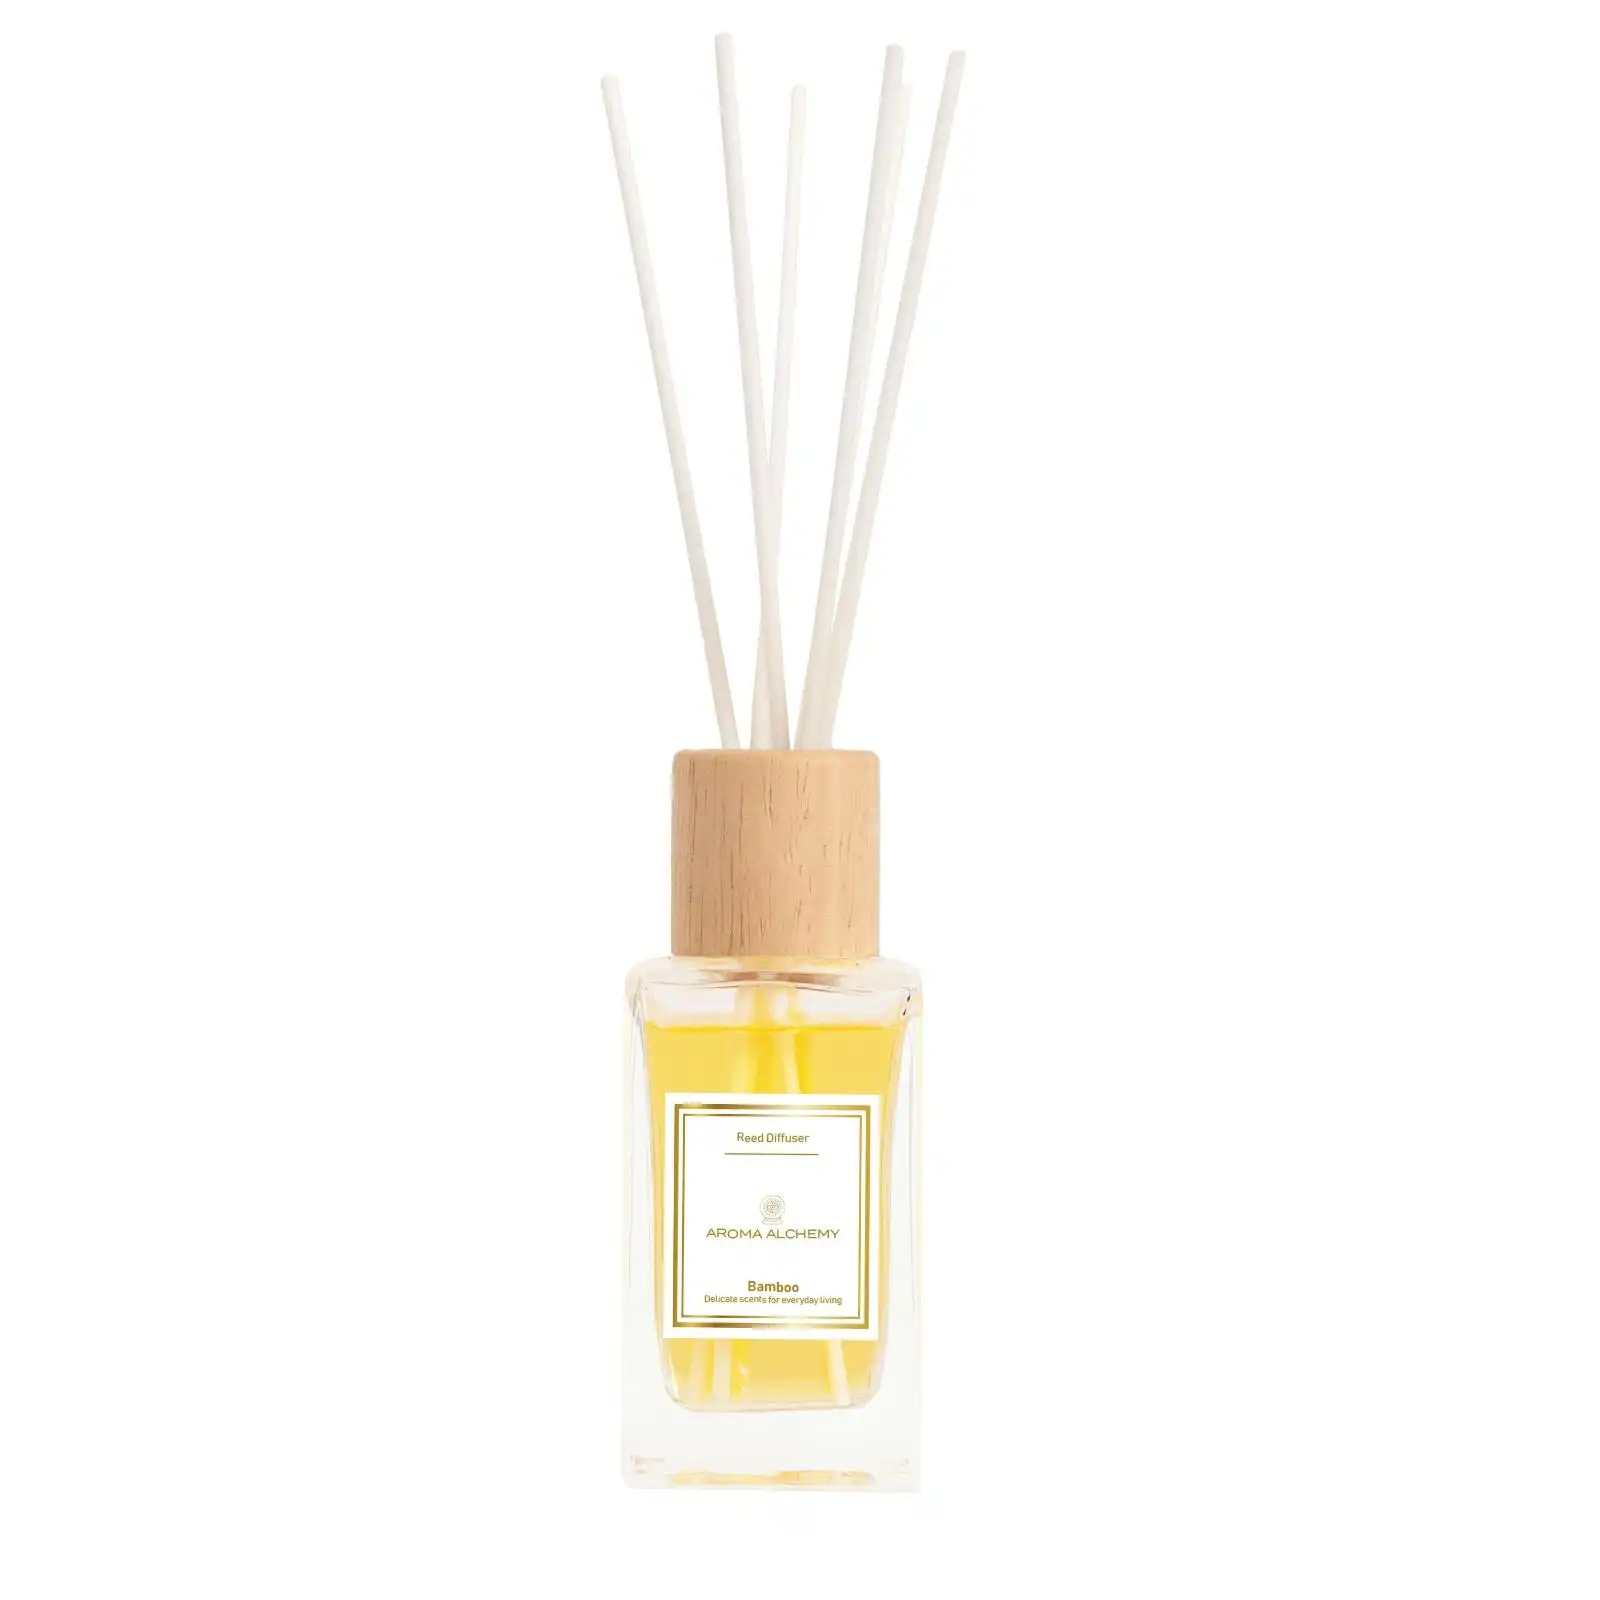 PureSpa Reed Diffuser Aromatherapy Home Fragrance 100ml